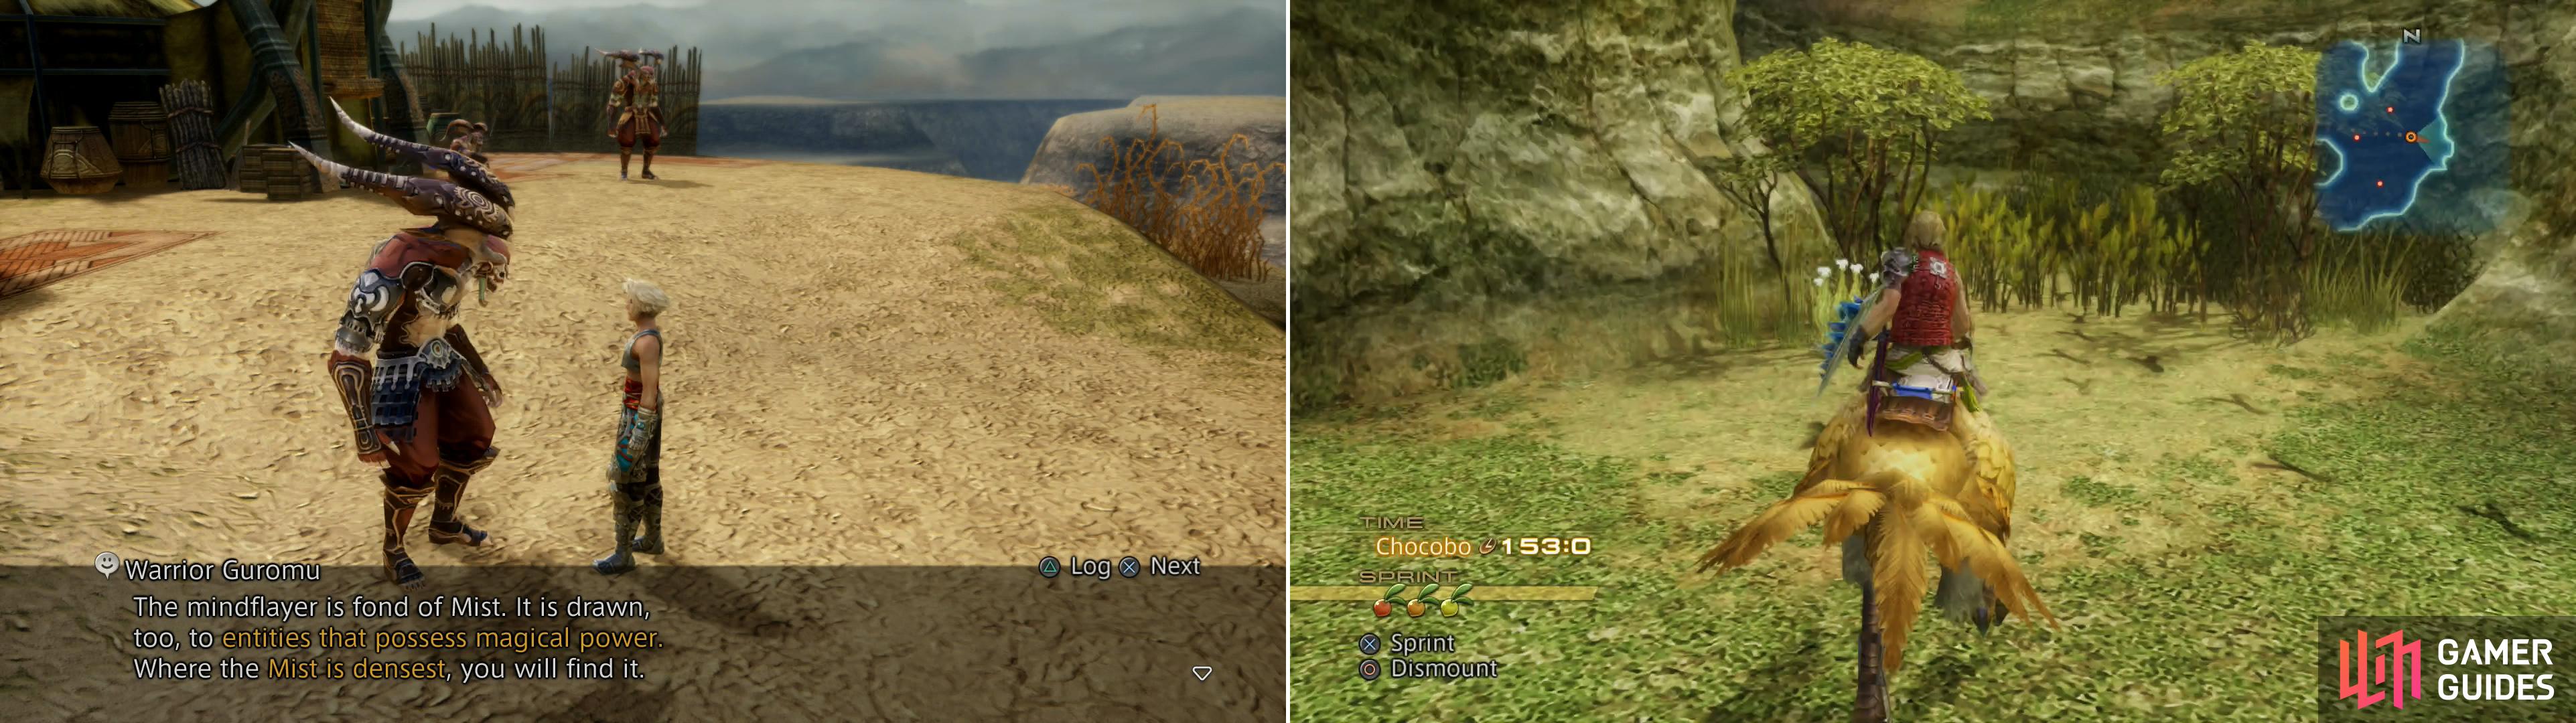 Talk to Warrior Guromu (left) to learn about the Mindflayer, then ride a Chocobo to the Henne Mines (right).